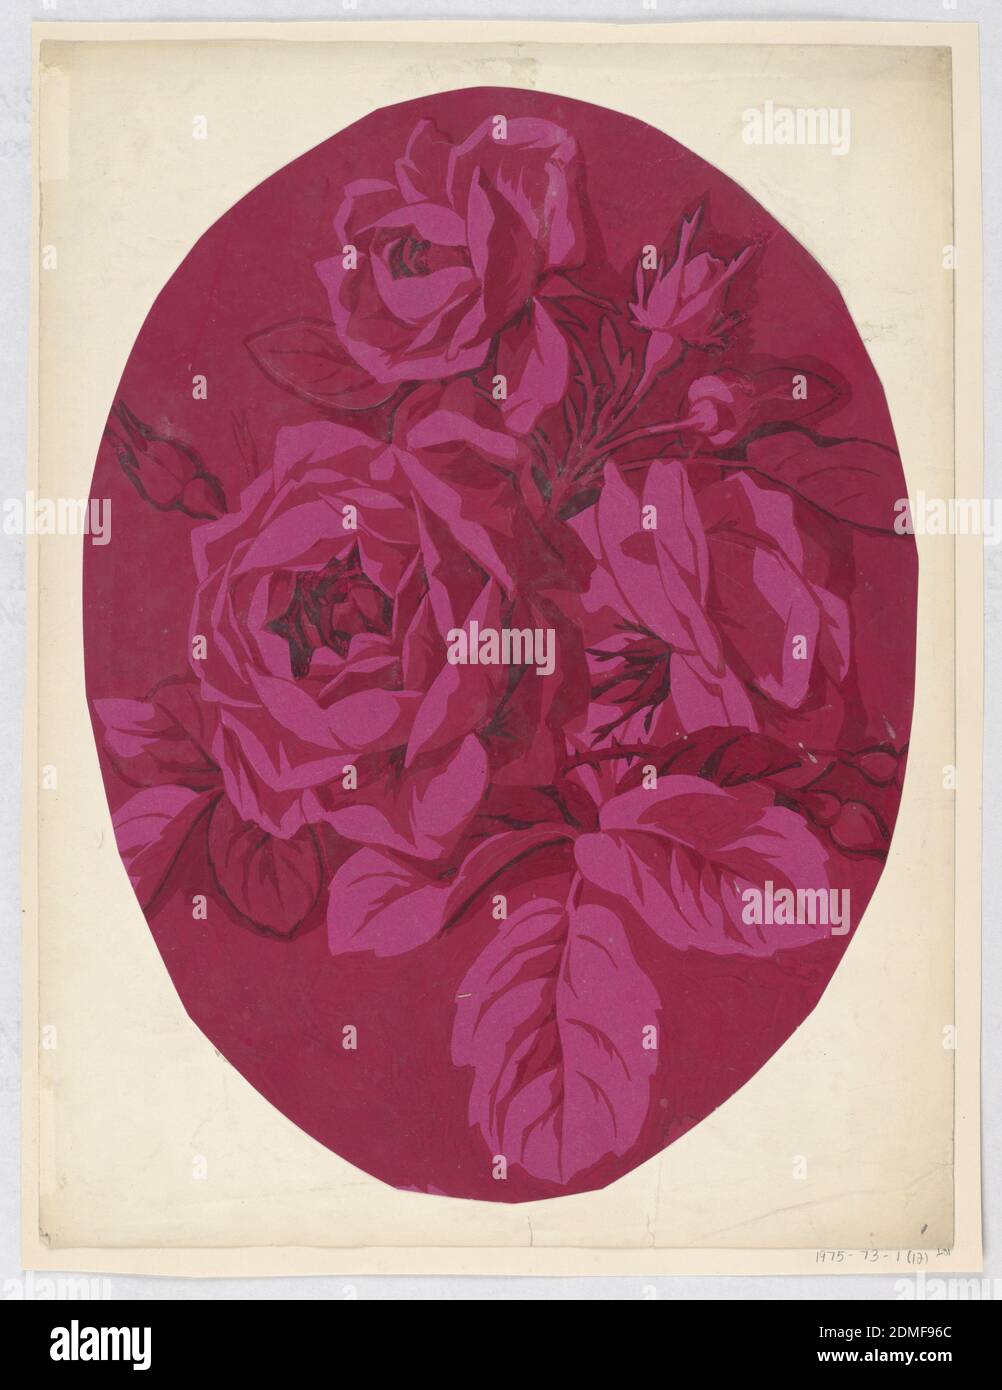 Drawing, Brush and gouache on cream paper, mounted on cream paper, Large roses in oval shape, all in deep fuchsia., France and USA, late 19th century, textile designs, Drawing Stock Photo